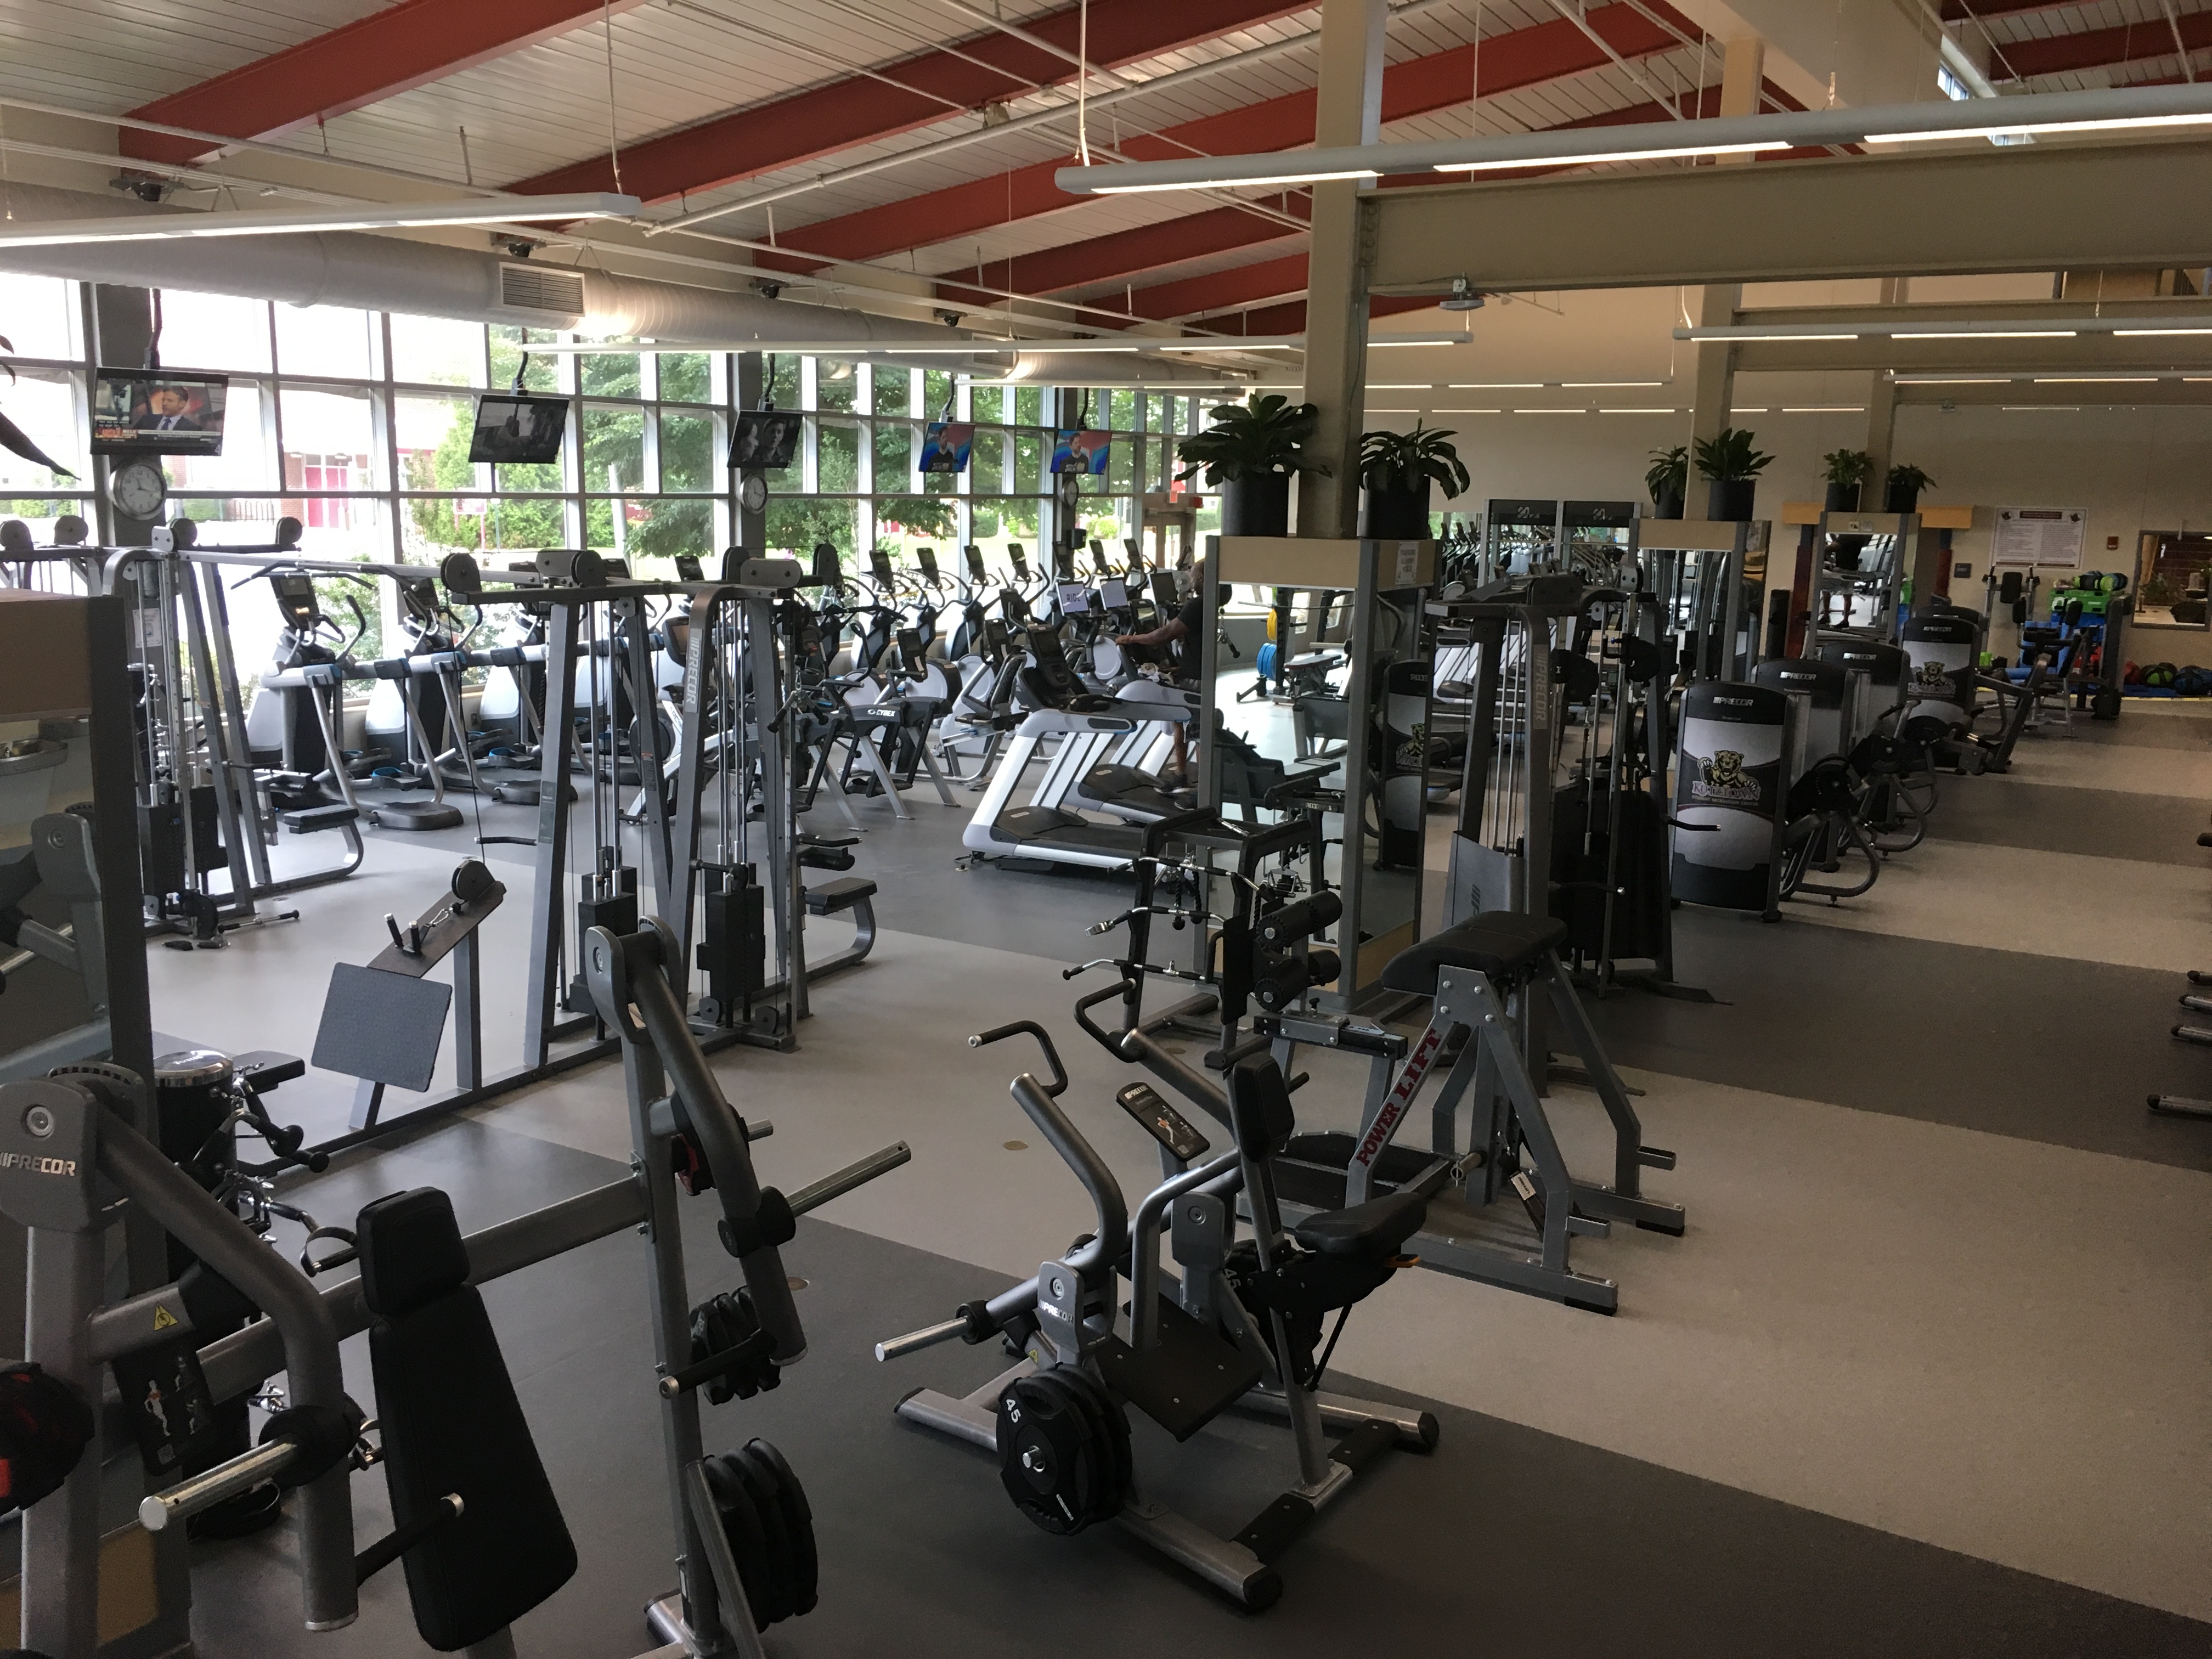 Student Recreation Center Fitness Area, currently empty